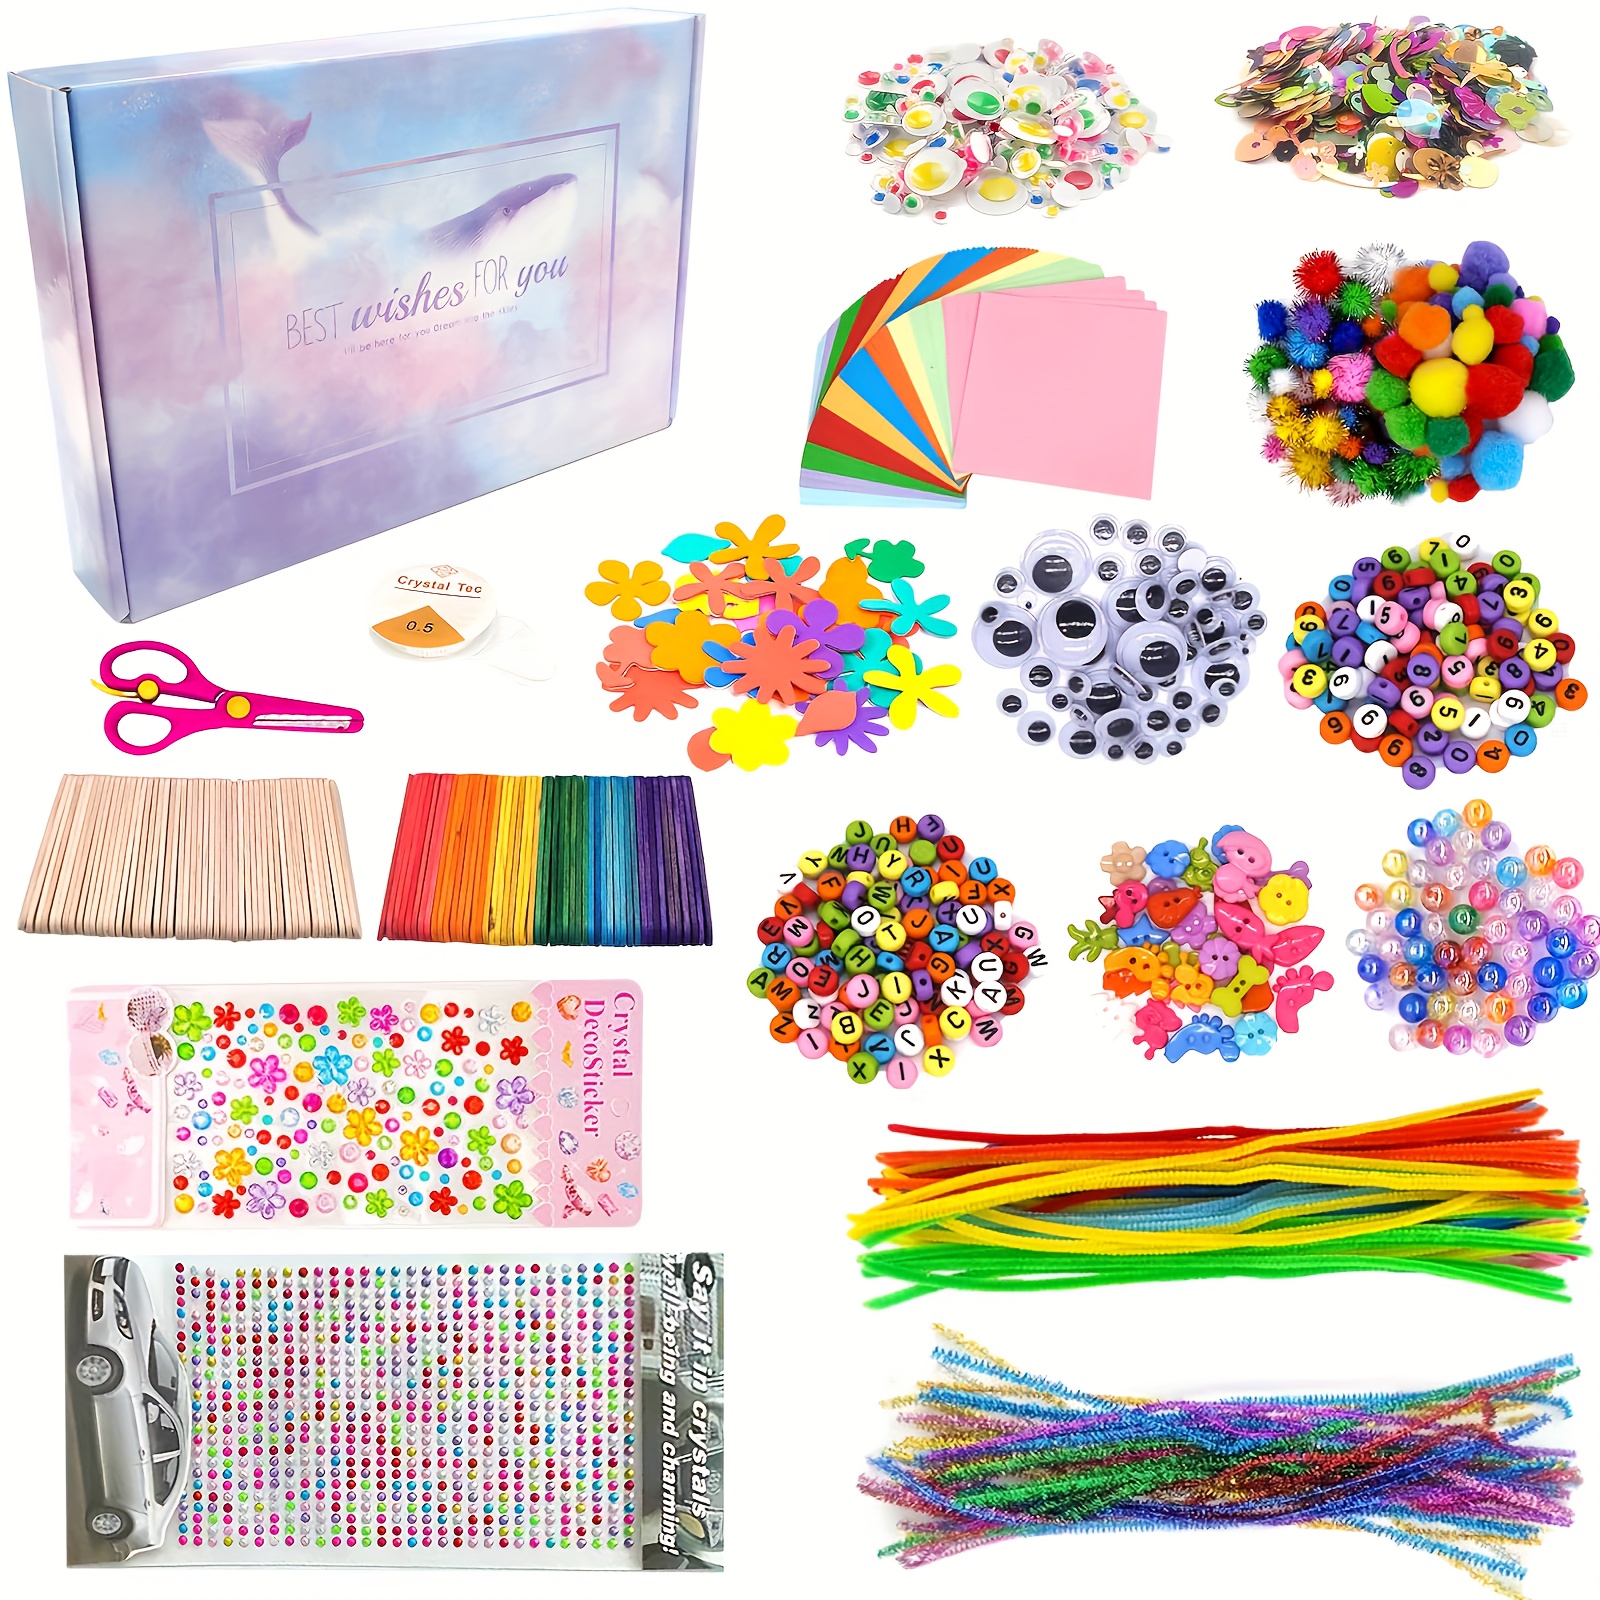 

Creative Diy Craft Kit With Pipe Cleaners & Pom Poms - Spark Creativity, All-age Art Supplies Set Craft Kits Diy Craft Kits